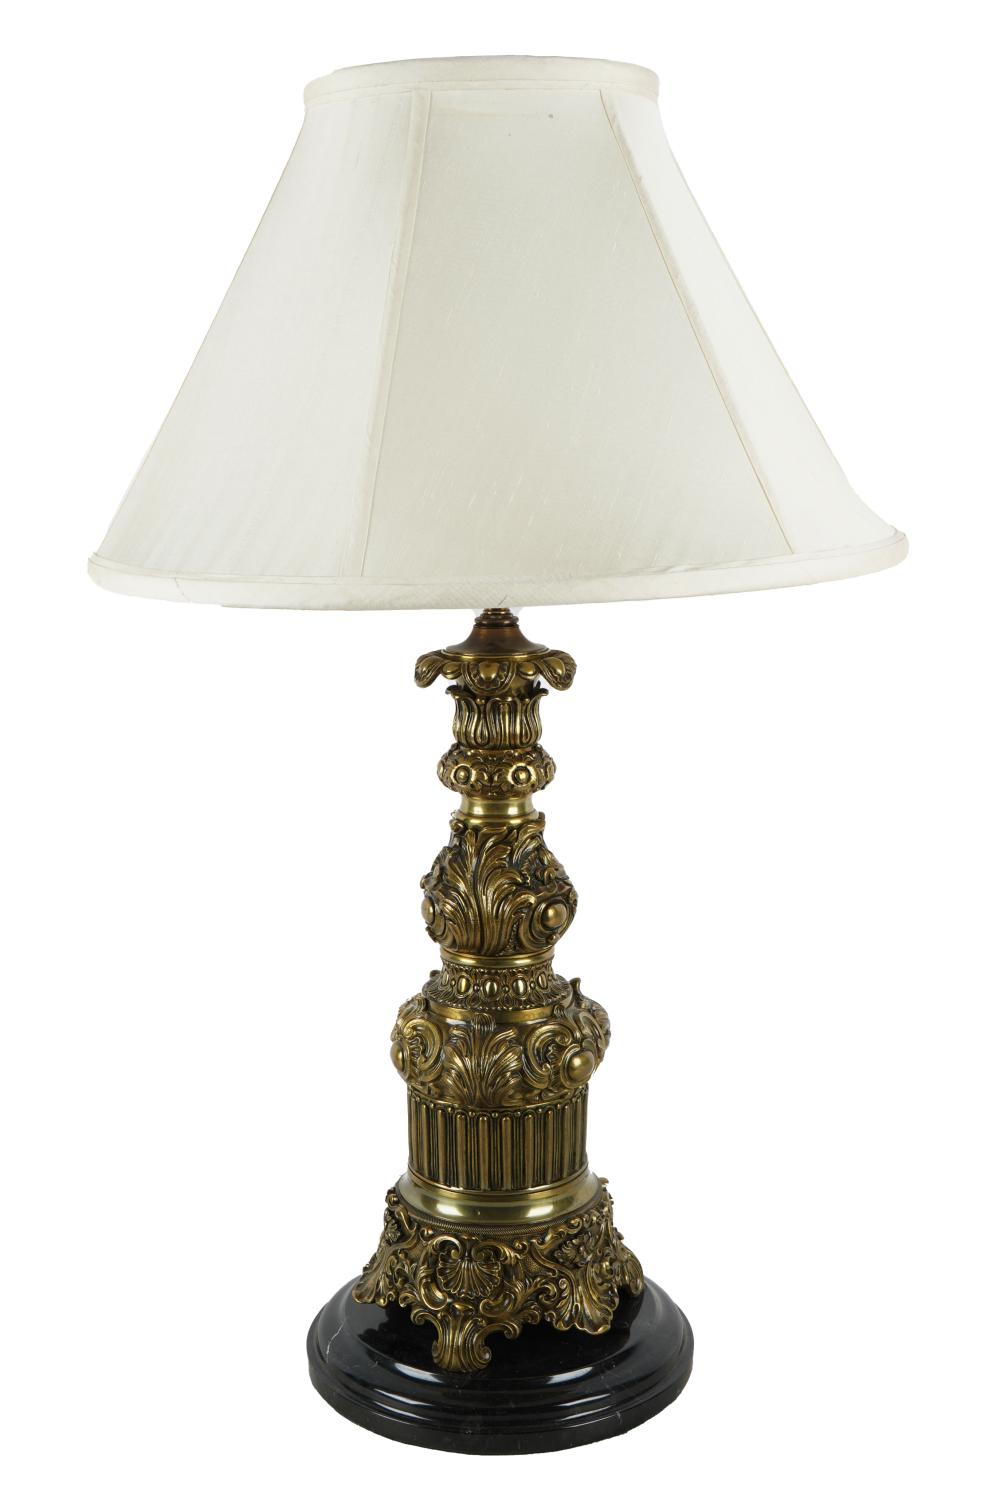 BRONZE ELECTRIFIED OIL LAMPwith